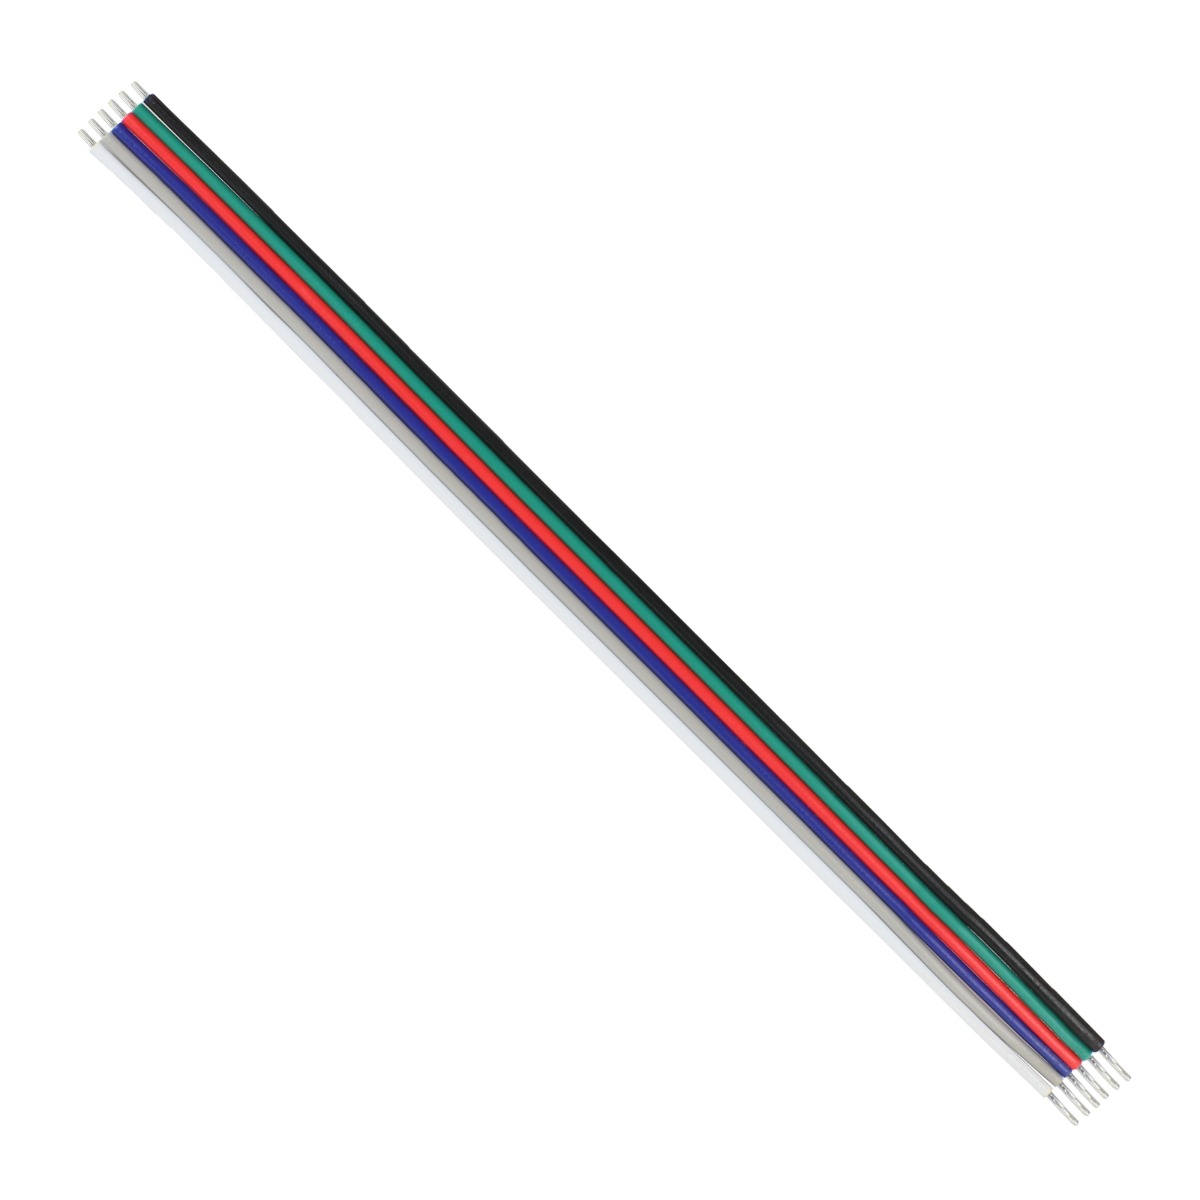 P-P cable 6 PIN LED strip connector